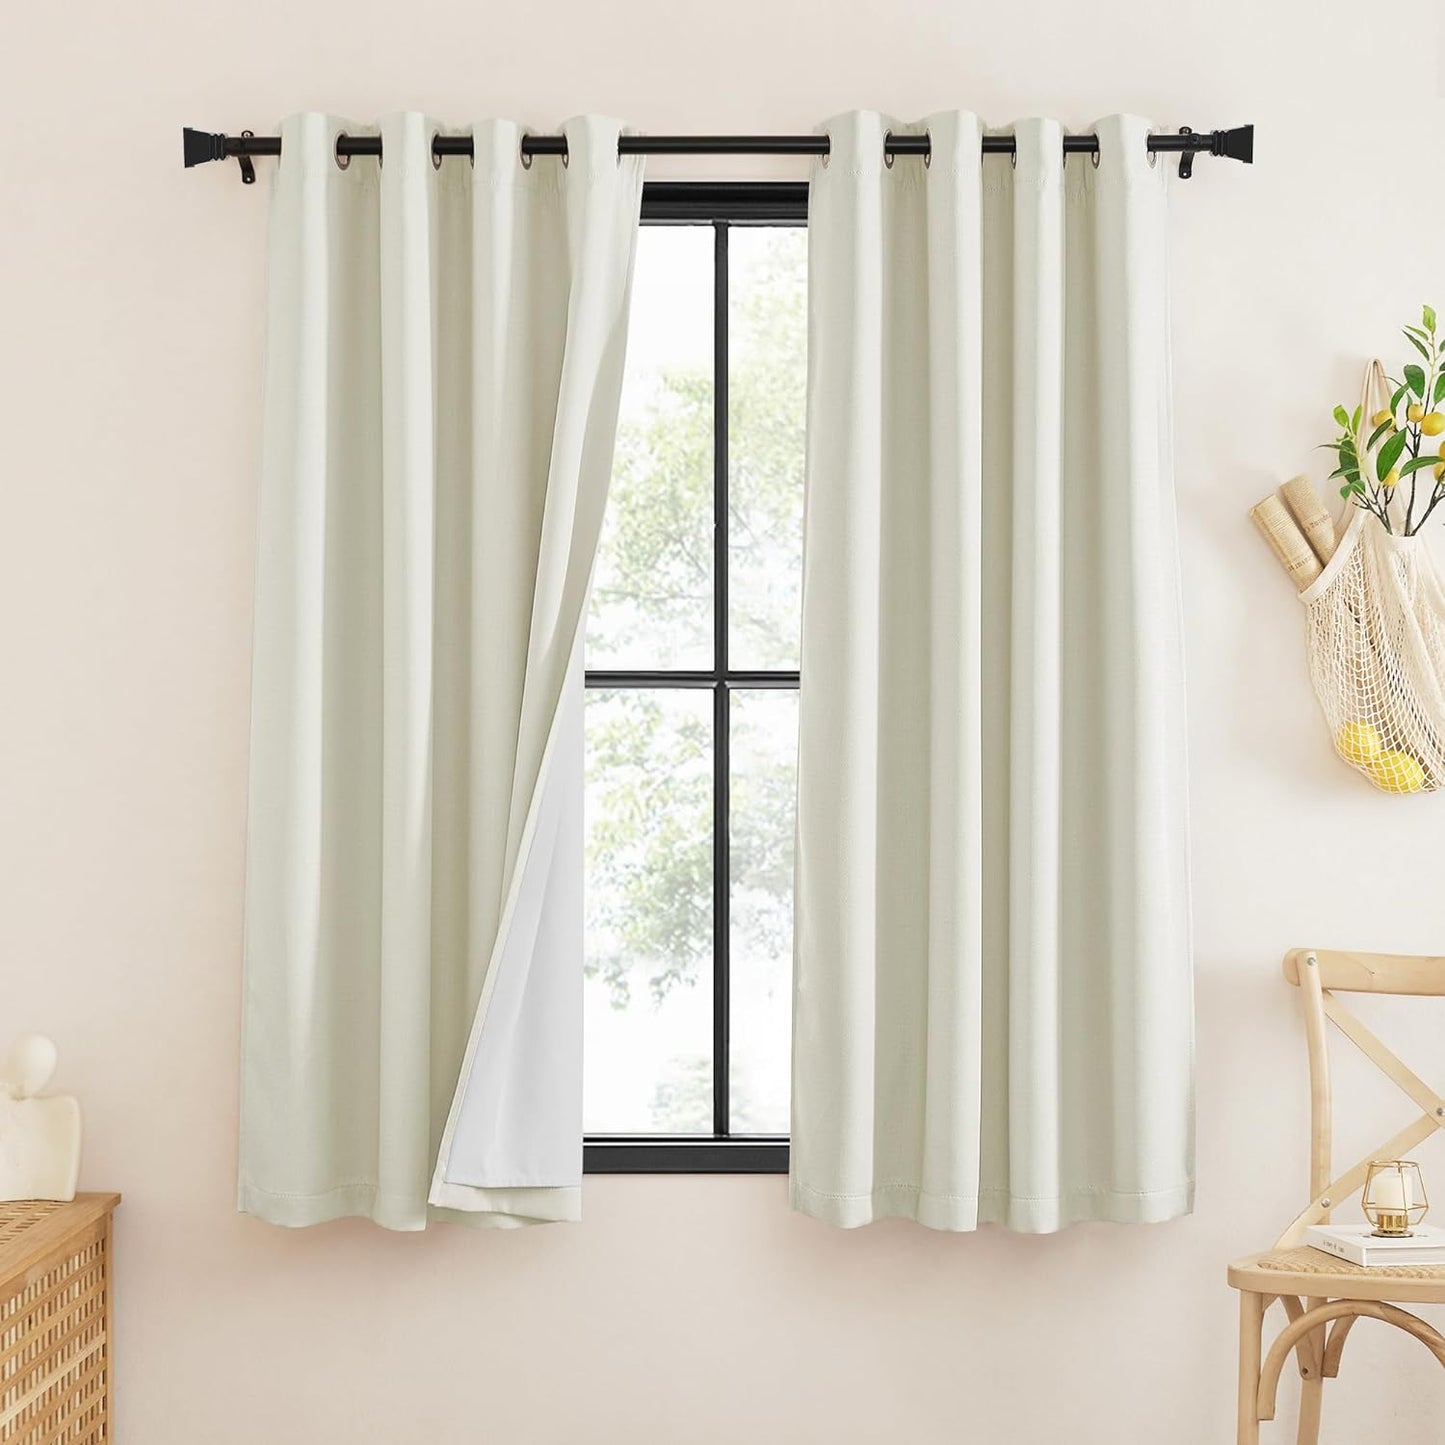 NICETOWN Thick Linen 100% Blackout Curtains for Living Room, Bronze Grommet 2 Layers Window Treatment with White Liner Thermal Curtains Sound Blocking for Bedroom, Natural, W52 X L96, 2 Panels  NICETOWN Thick Faux Linen W52 X L63 